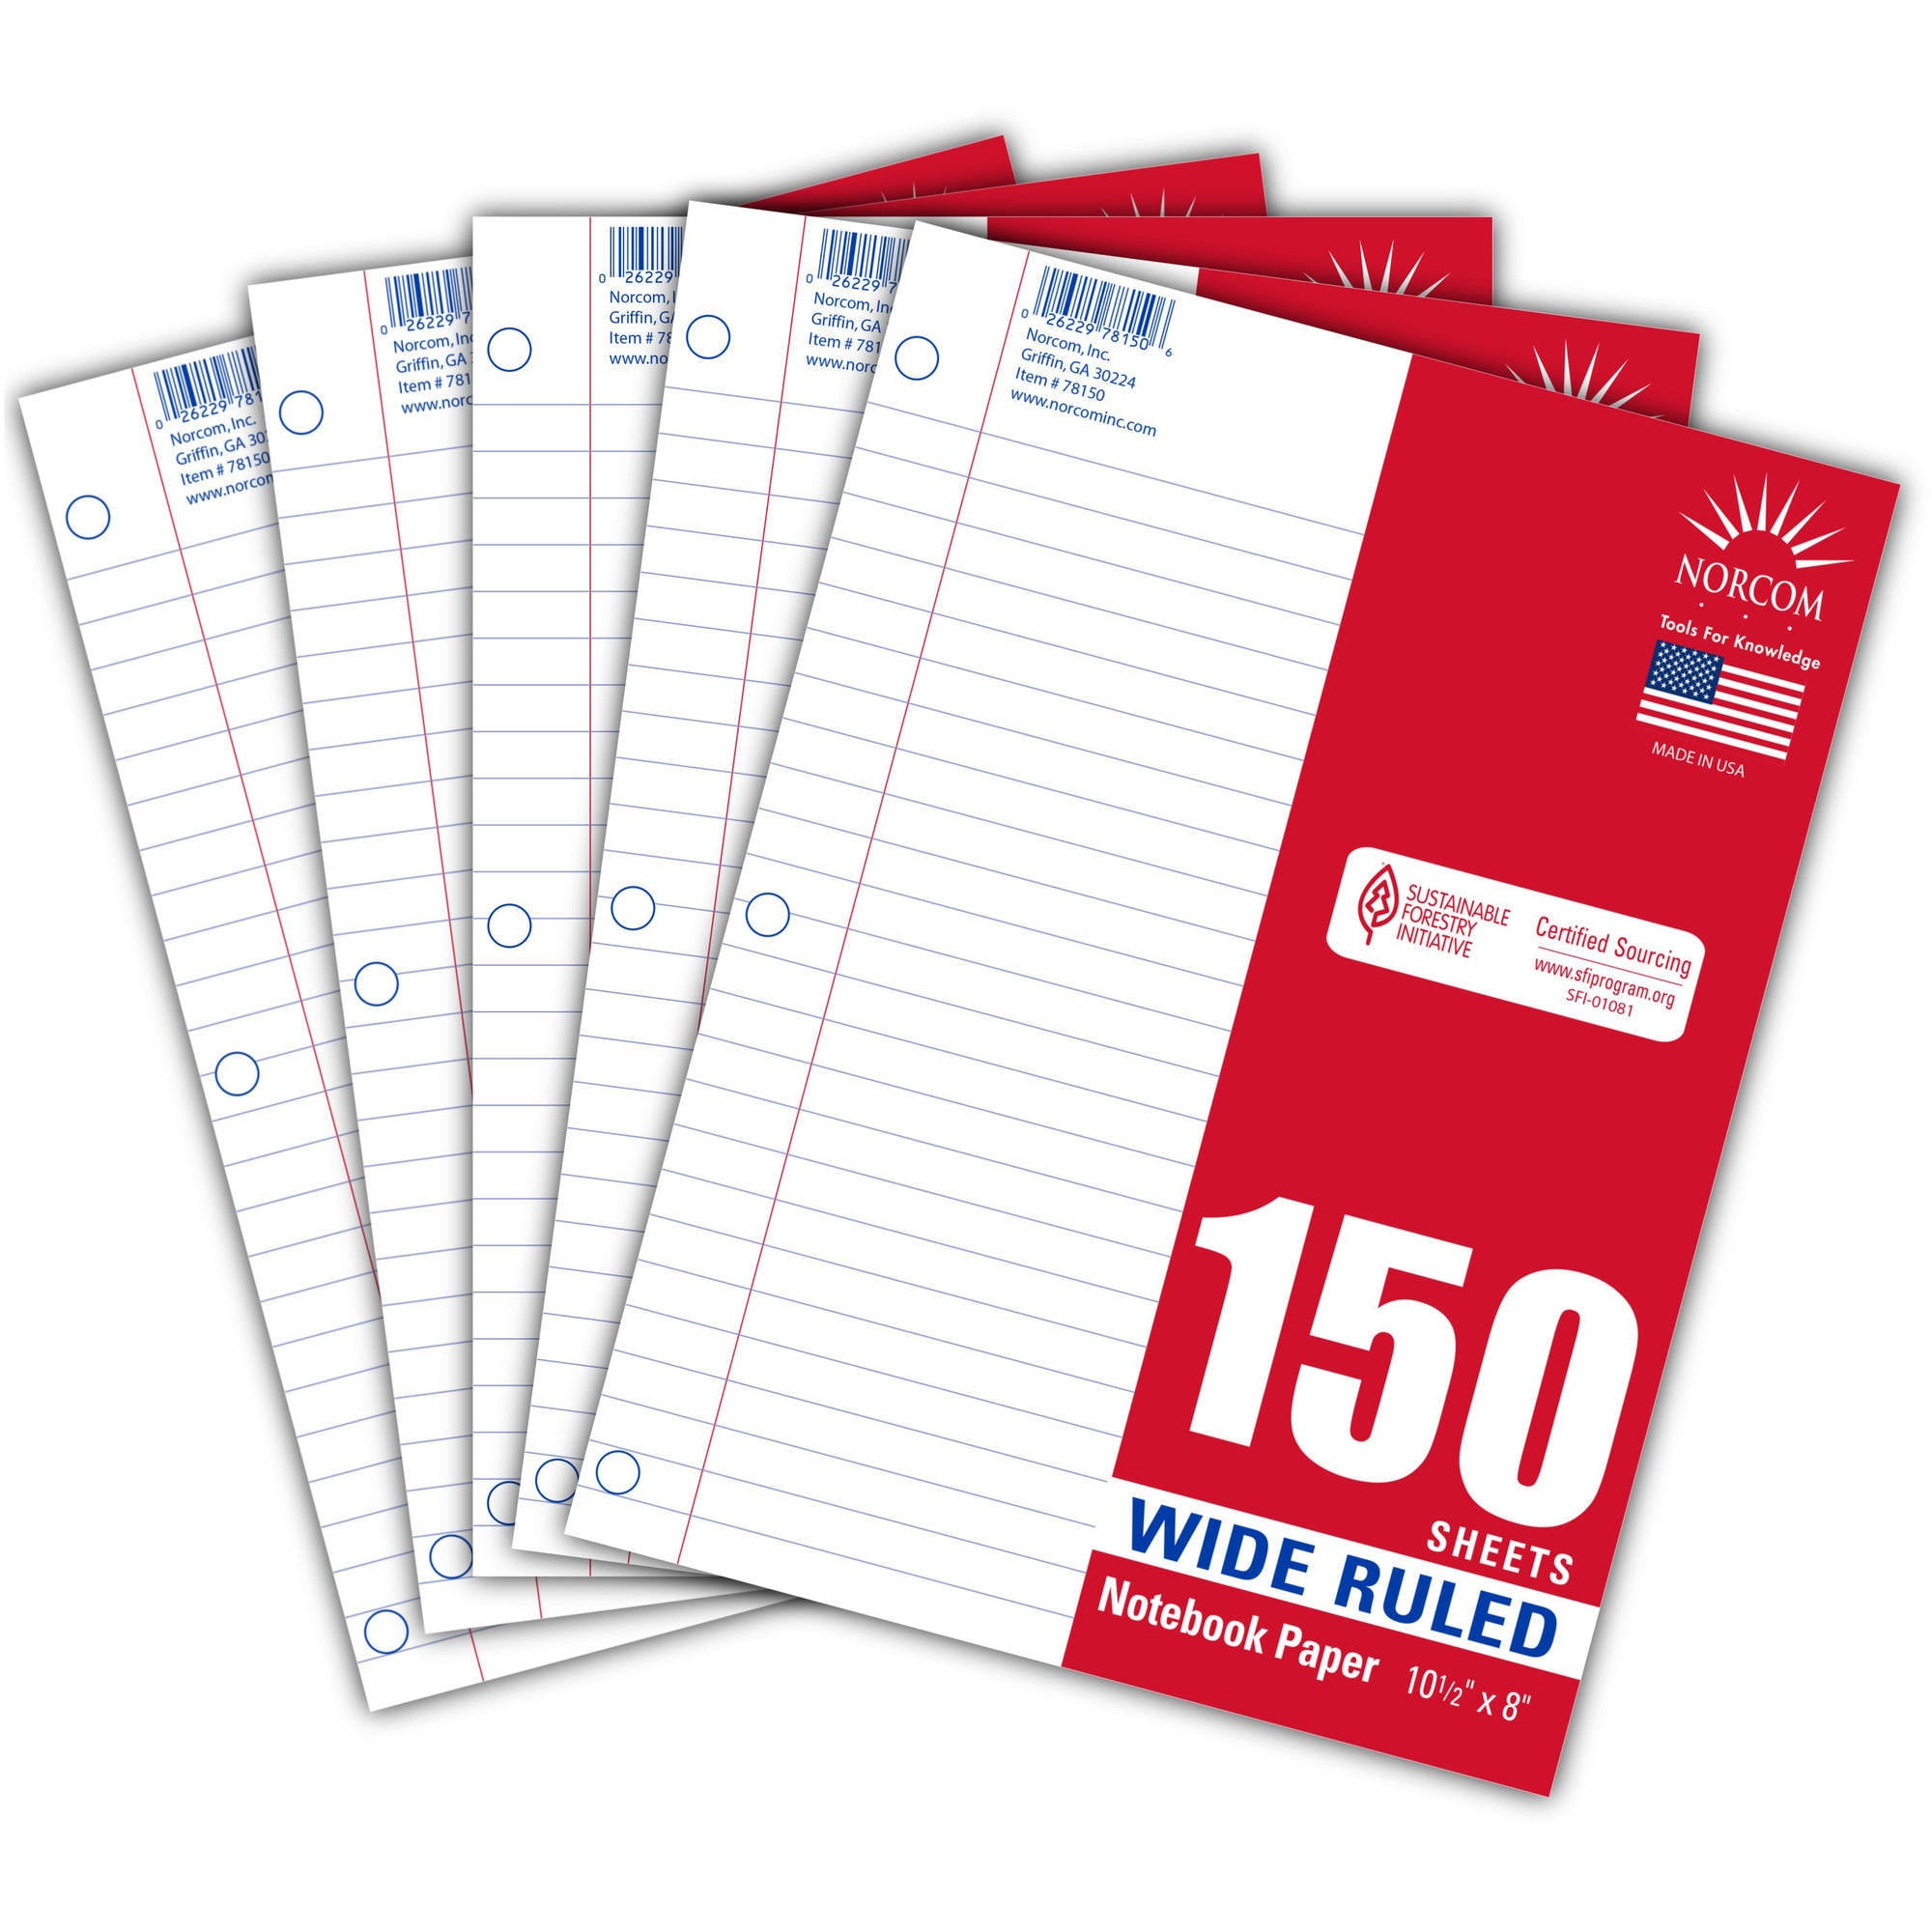 Norcom Filler Paper, Wide Ruled, 150 Pages, 8 x 10.5, 78150